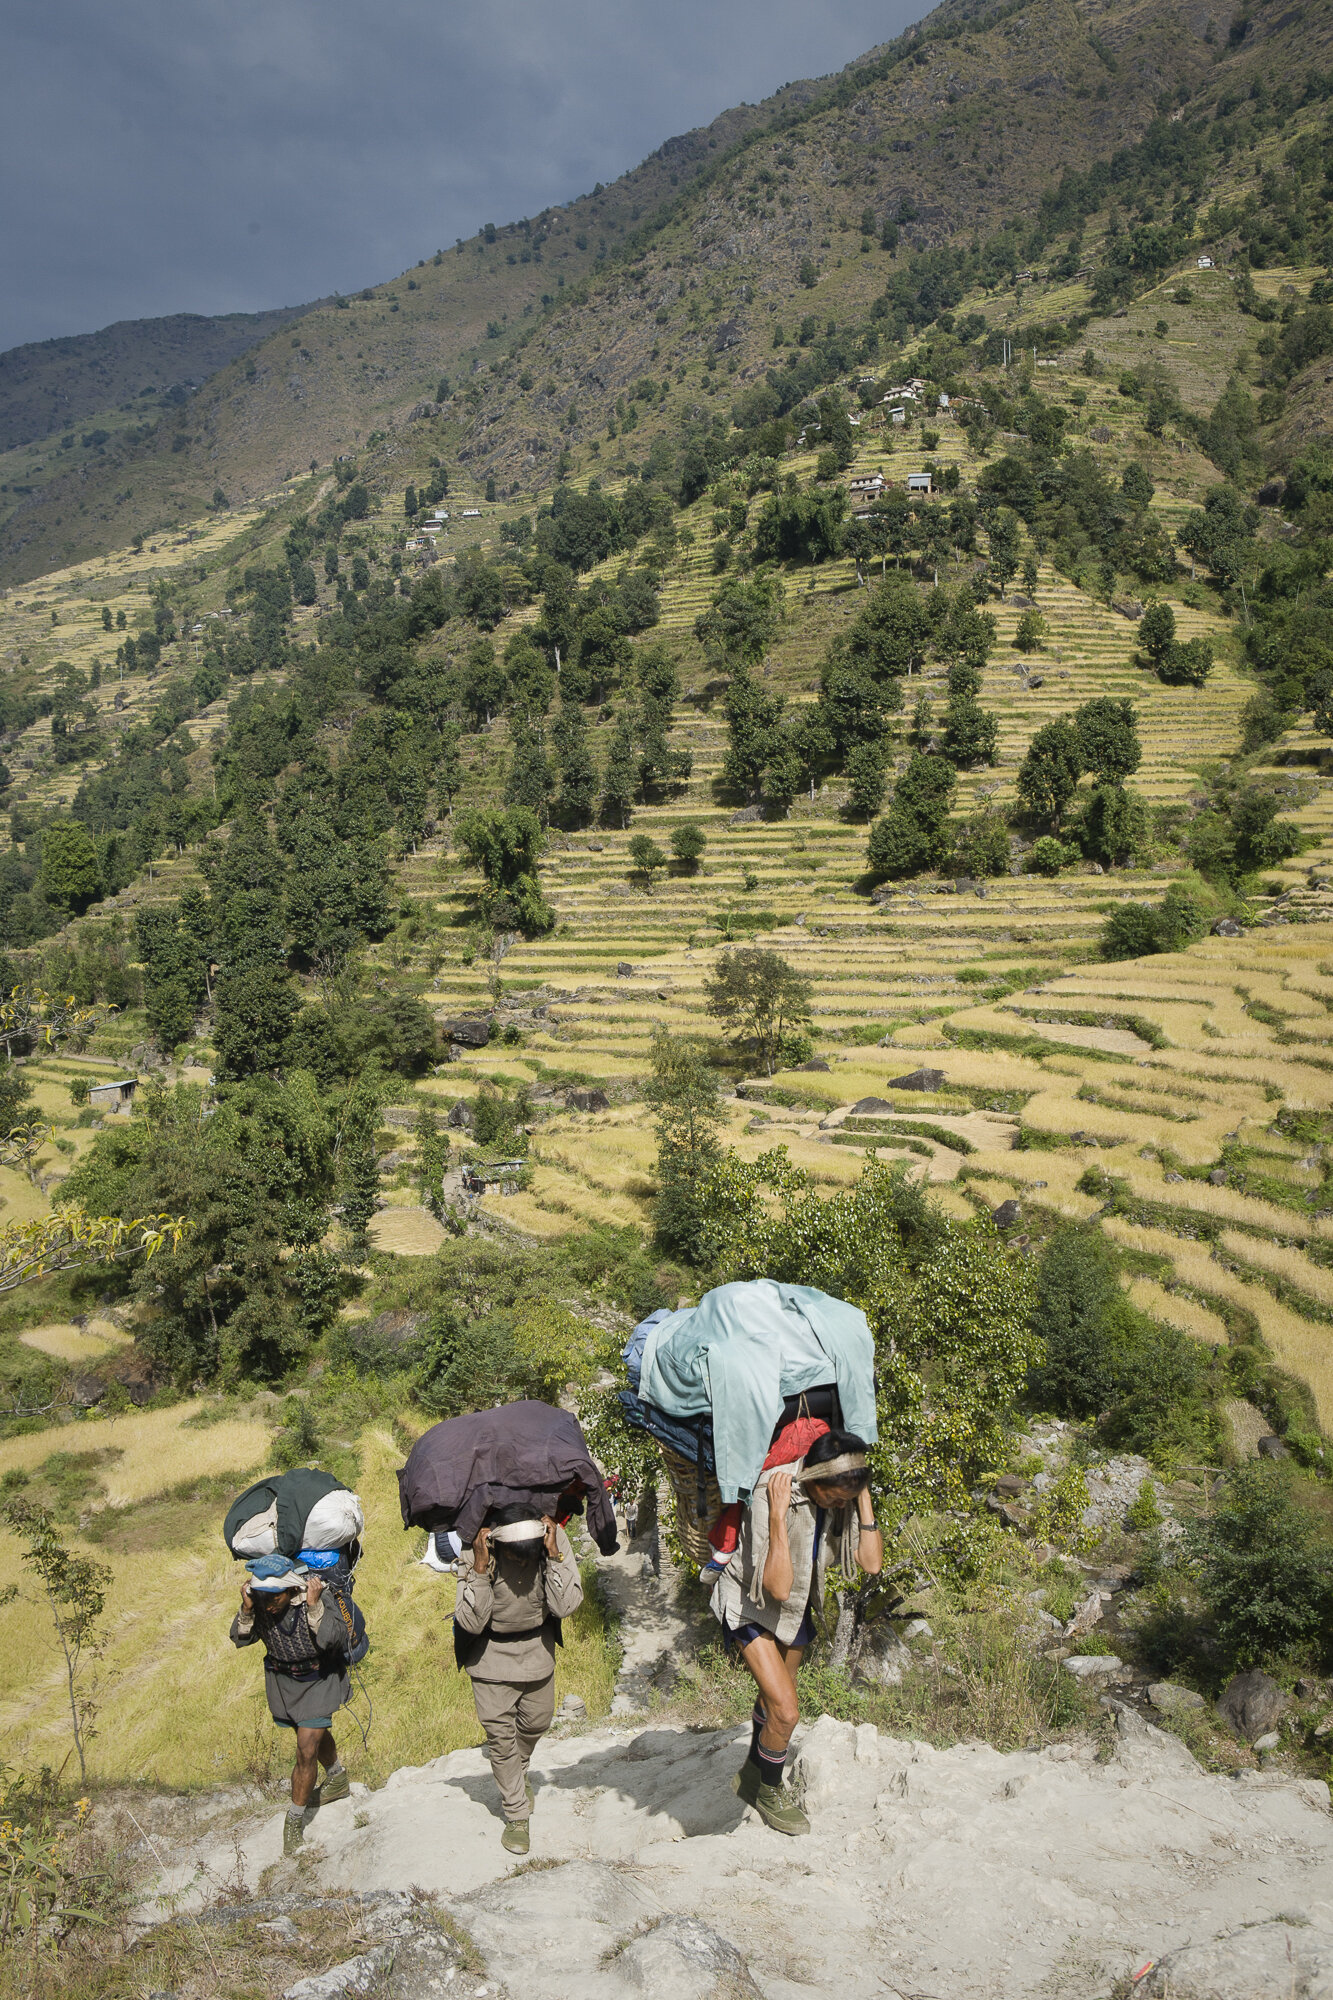  Porters carry their heavy loads up and down the often steep paths of the Annapurna Circuit in Nepal. 